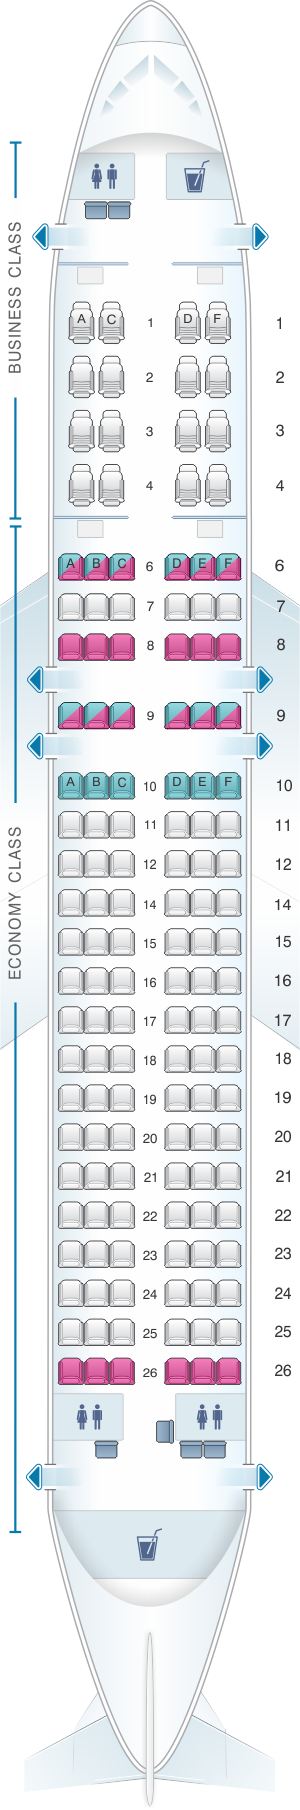 Seat map for SriLankan Airlines Airbus A320 Config. 2